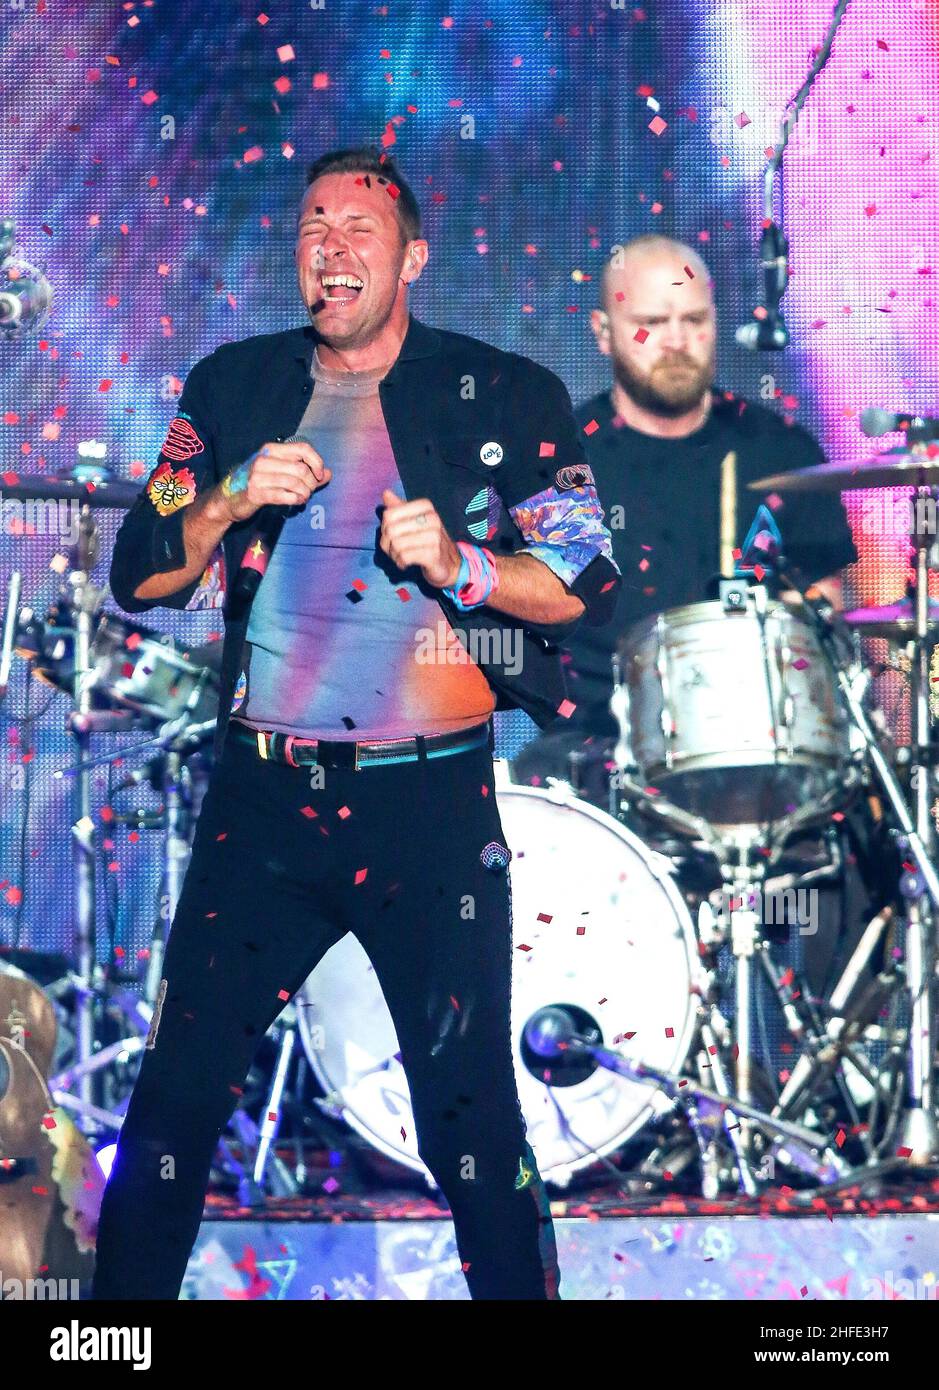 Coldplay legend Will Champion returns back to former school